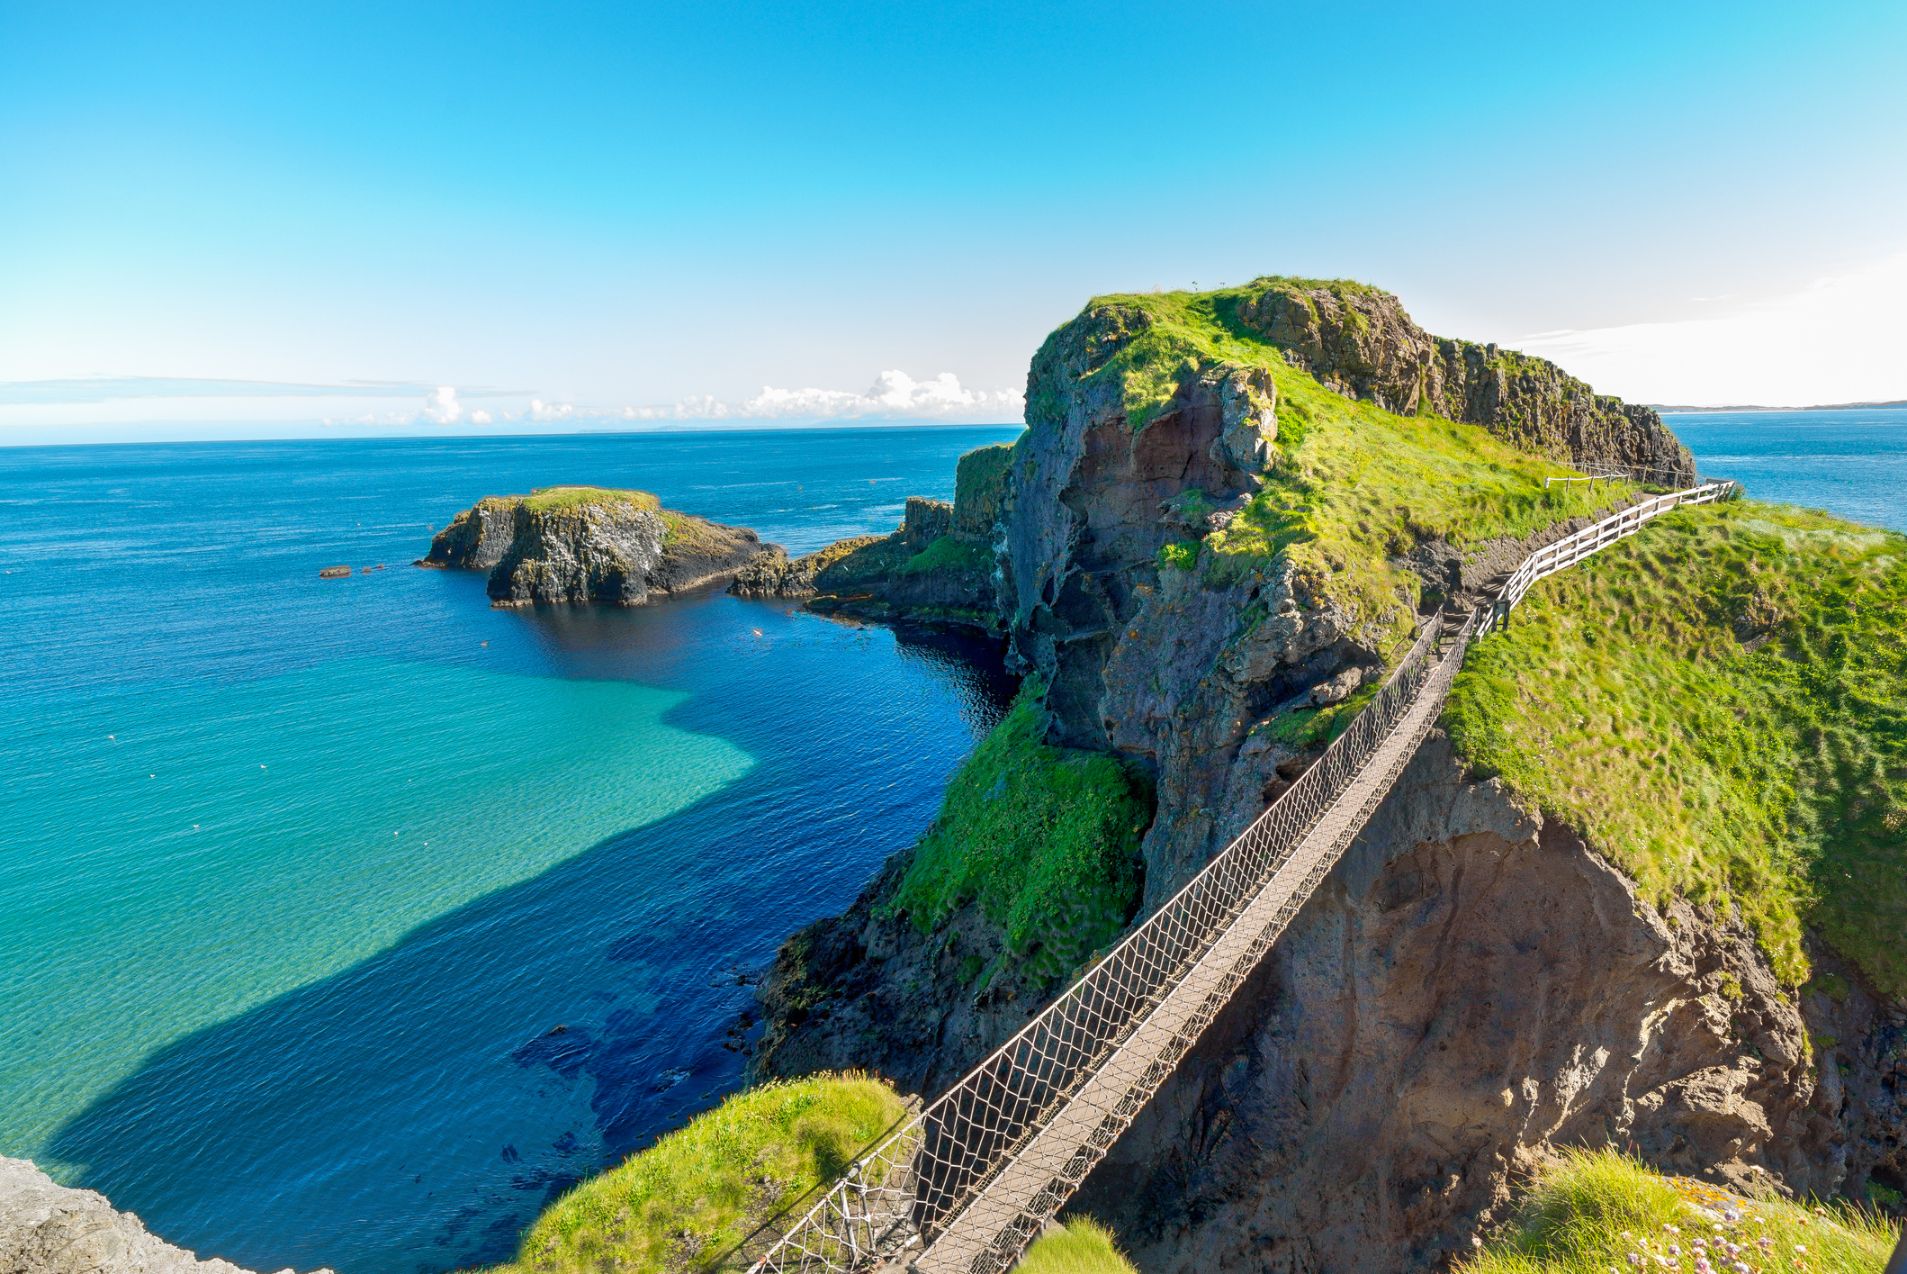 The Carrick-a-Rede rope bridge is not a river, but it is very pretty